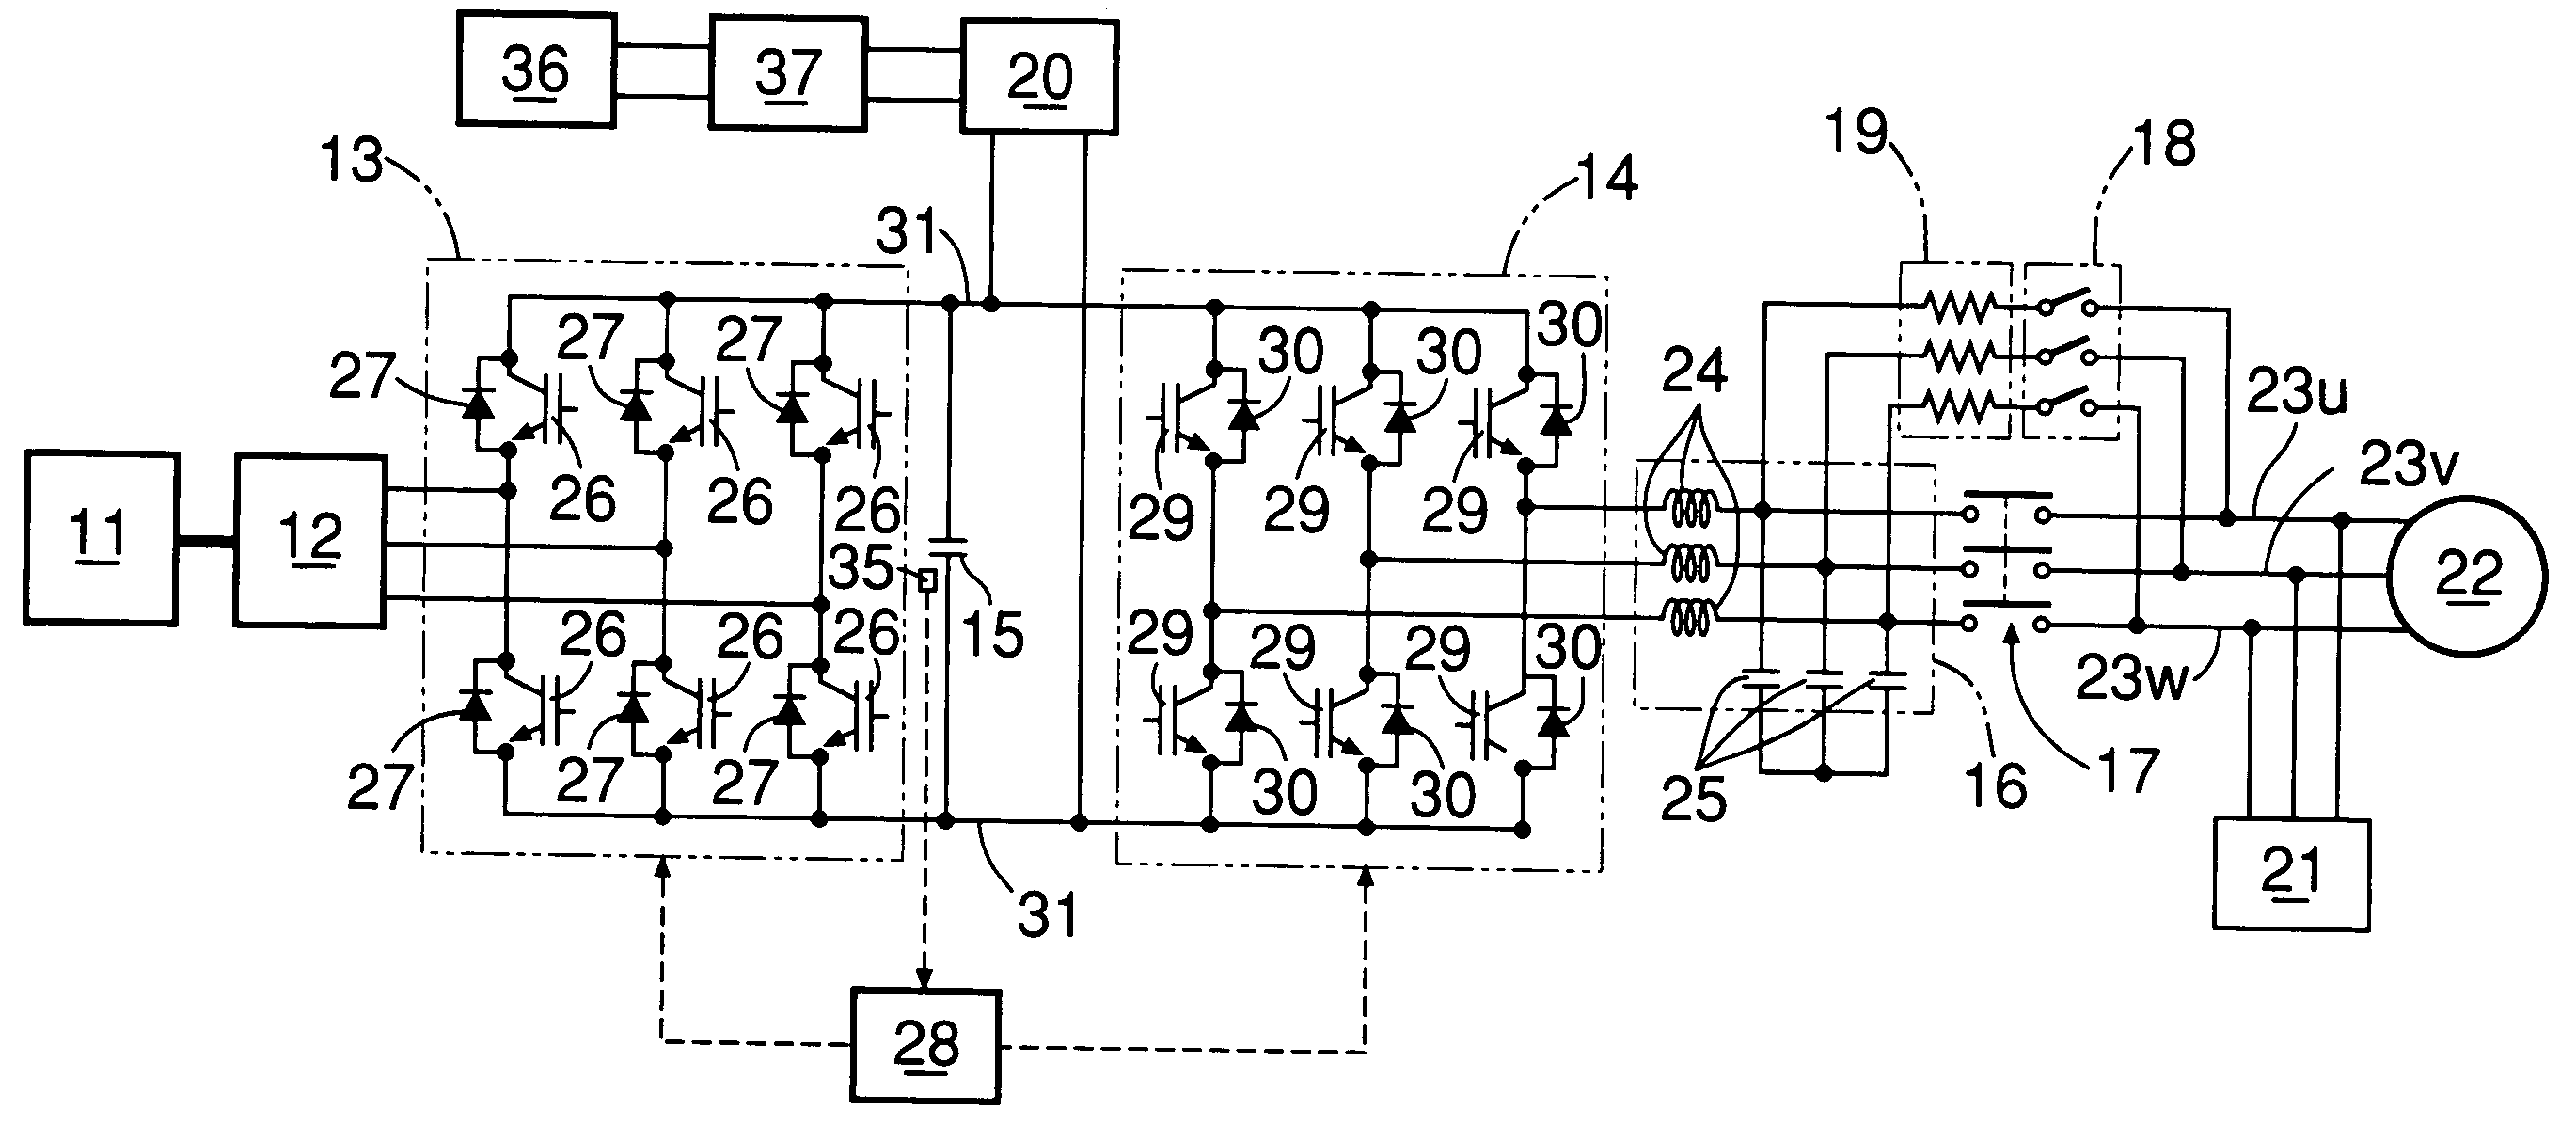 Pre-charging system for smoothing capacitor